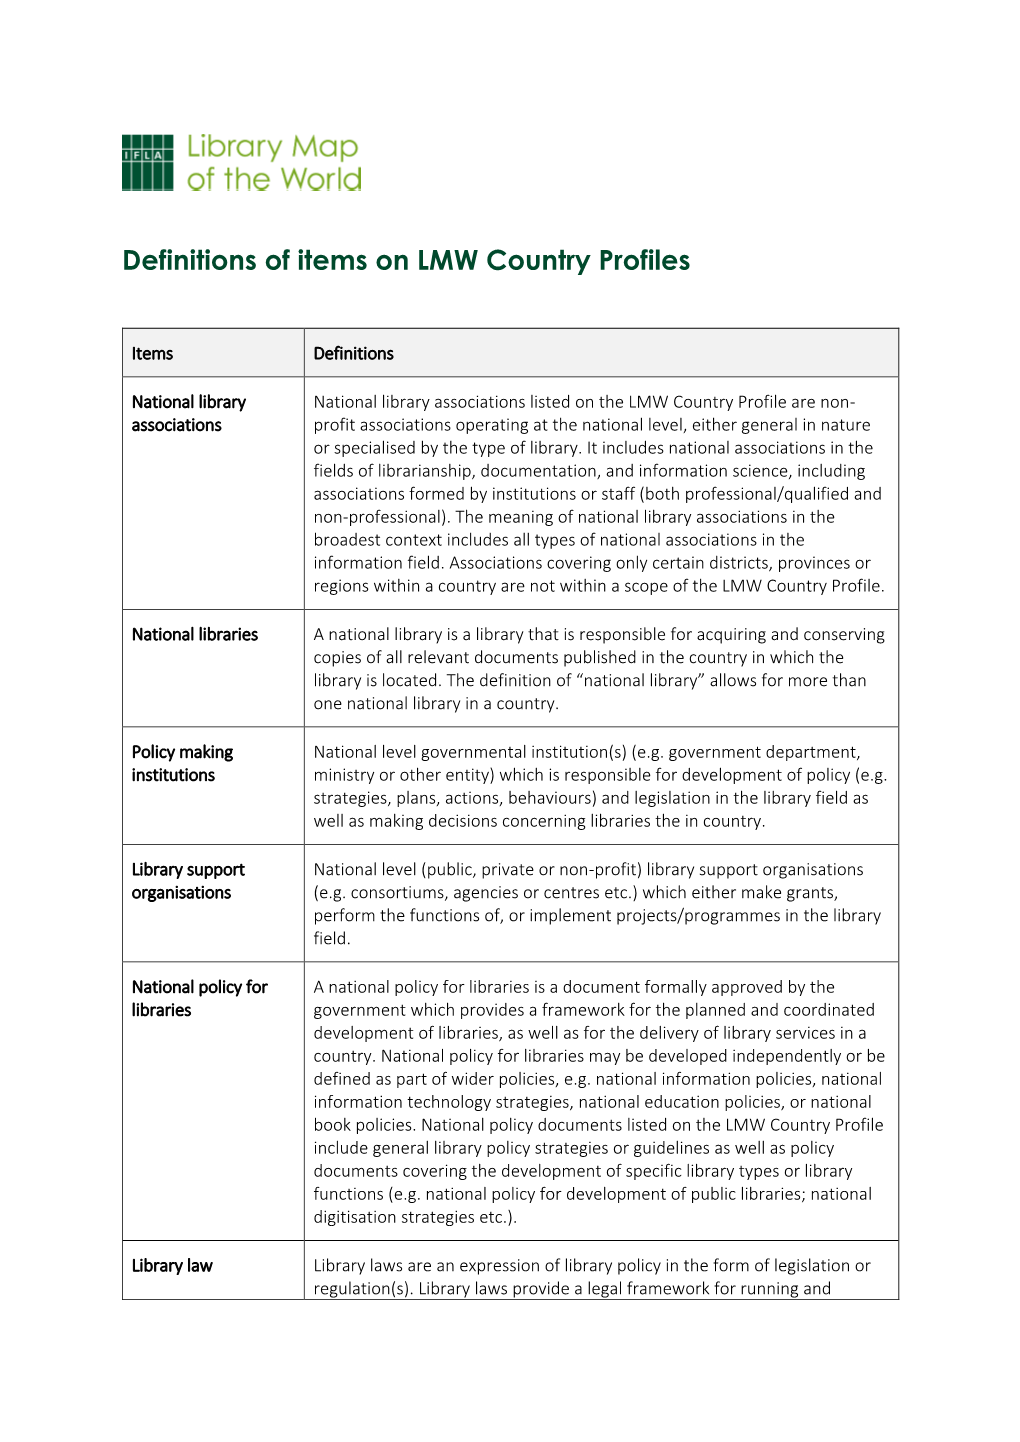 Definitions of Items on LMW Country Profiles